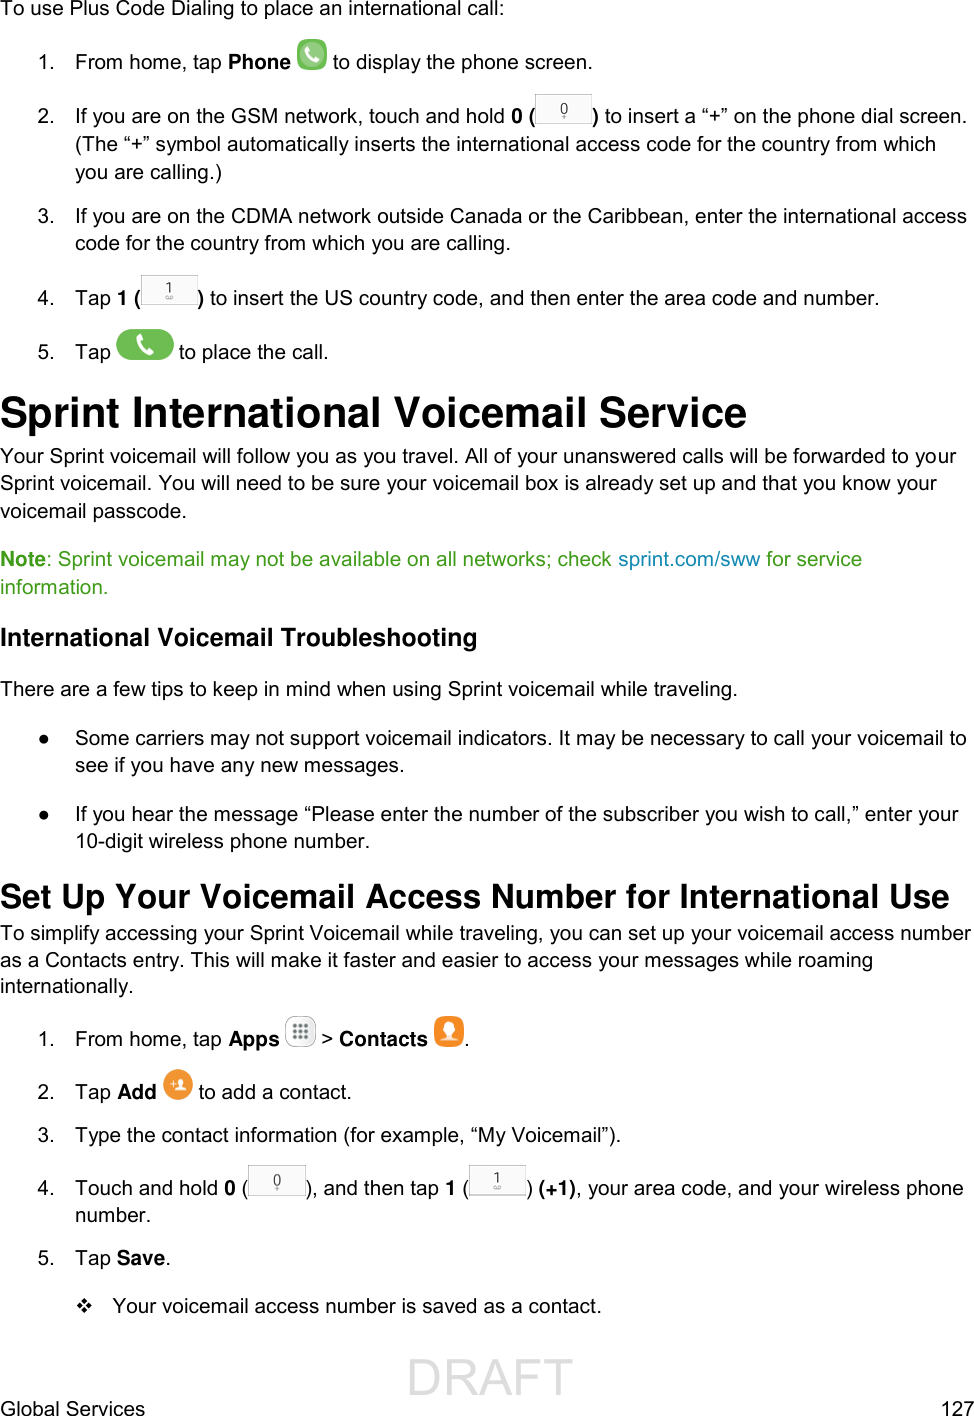                  DRAFT FOR INTERNAL USE ONLYGlobal Services  127 To use Plus Code Dialing to place an international call:  1.  From home, tap Phone   to display the phone screen. 2.  If you are on the GSM network, touch and hold 0 ( ) to insert a “+” on the phone dial screen. (The “+” symbol automatically inserts the international access code for the country from which you are calling.) 3.  If you are on the CDMA network outside Canada or the Caribbean, enter the international access code for the country from which you are calling. 4. Tap 1 ( ) to insert the US country code, and then enter the area code and number. 5.  Tap   to place the call. Sprint International Voicemail Service  Your Sprint voicemail will follow you as you travel. All of your unanswered calls will be forwarded to your Sprint voicemail. You will need to be sure your voicemail box is already set up and that you know your voicemail passcode. Note: Sprint voicemail may not be available on all networks; check sprint.com/sww for service information. International Voicemail Troubleshooting  There are a few tips to keep in mind when using Sprint voicemail while traveling. ●  Some carriers may not support voicemail indicators. It may be necessary to call your voicemail to see if you have any new messages. ●  If you hear the message “Please enter the number of the subscriber you wish to call,” enter your 10-digit wireless phone number.  Set Up Your Voicemail Access Number for International Use  To simplify accessing your Sprint Voicemail while traveling, you can set up your voicemail access number as a Contacts entry. This will make it faster and easier to access your messages while roaming internationally. 1.  From home, tap Apps   &gt; Contacts .  2.  Tap Add   to add a contact.  3.  Type the contact information (for example, “My Voicemail”). 4.  Touch and hold 0 ( ), and then tap 1 ( ) (+1), your area code, and your wireless phone number.  5.  Tap Save.    Your voicemail access number is saved as a contact. 